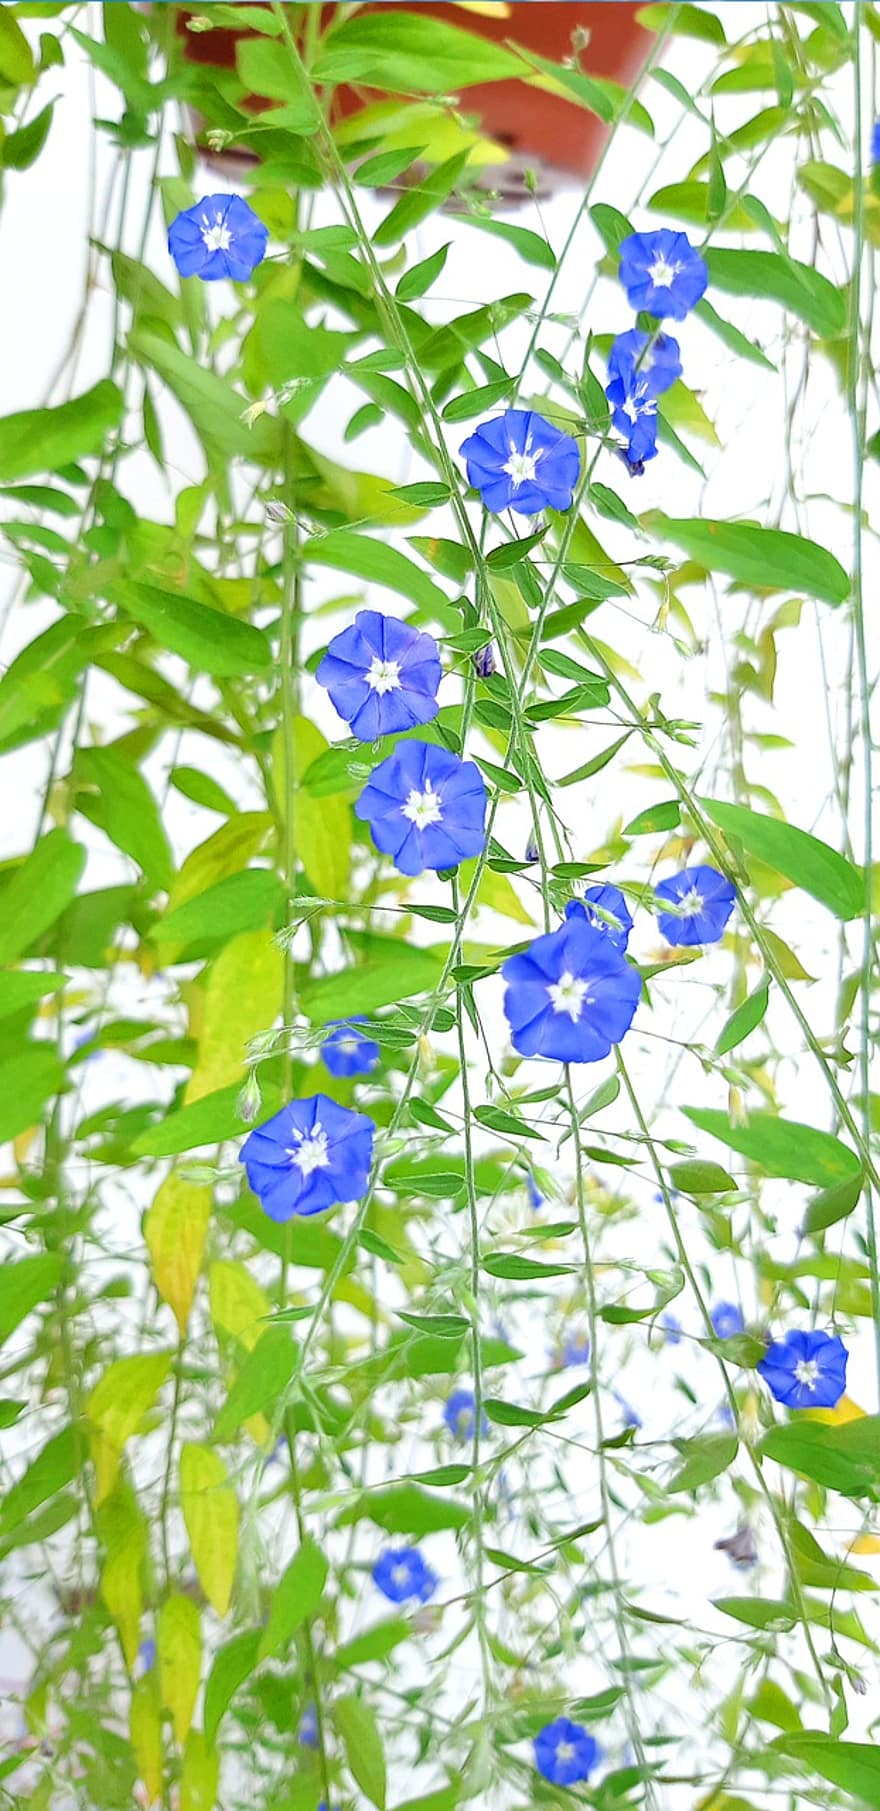 Morning Glory, Flowers, Plant, Blue Flowers, Petals, Bloom, Leaves, Spring, Garden, Nature